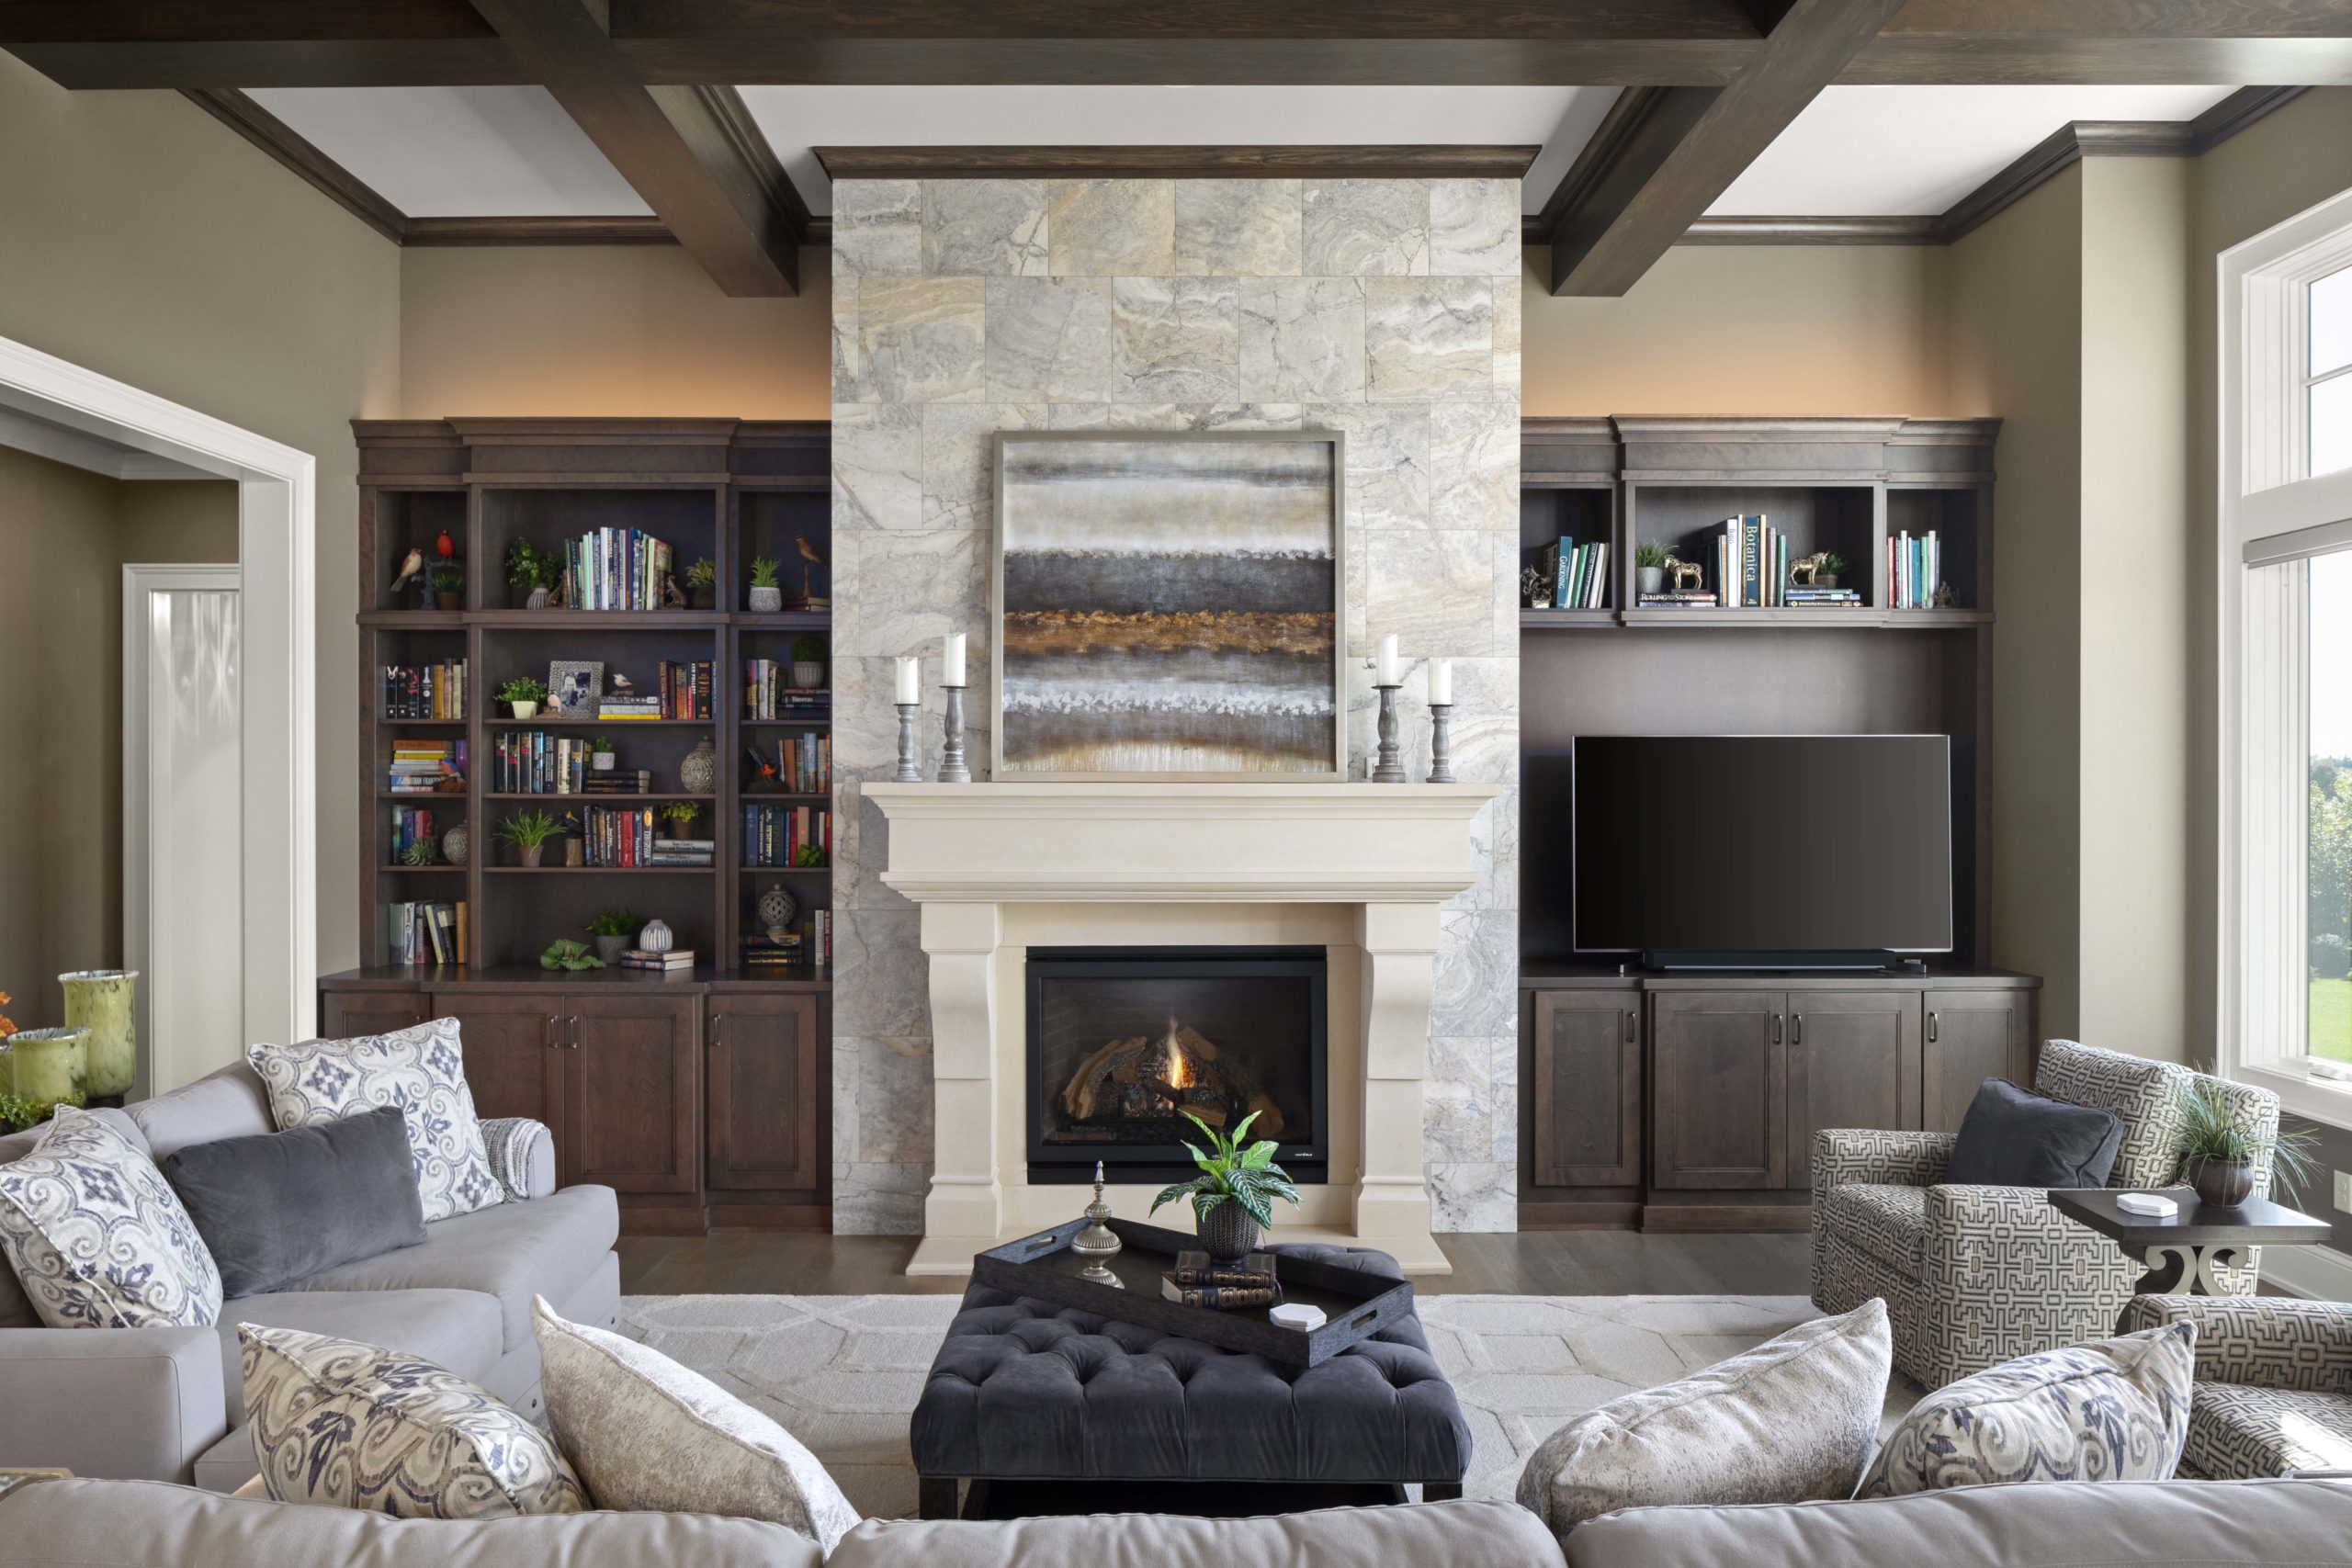 A prairie transitional living room with a stone fireplace and bookshelves in a custom home.